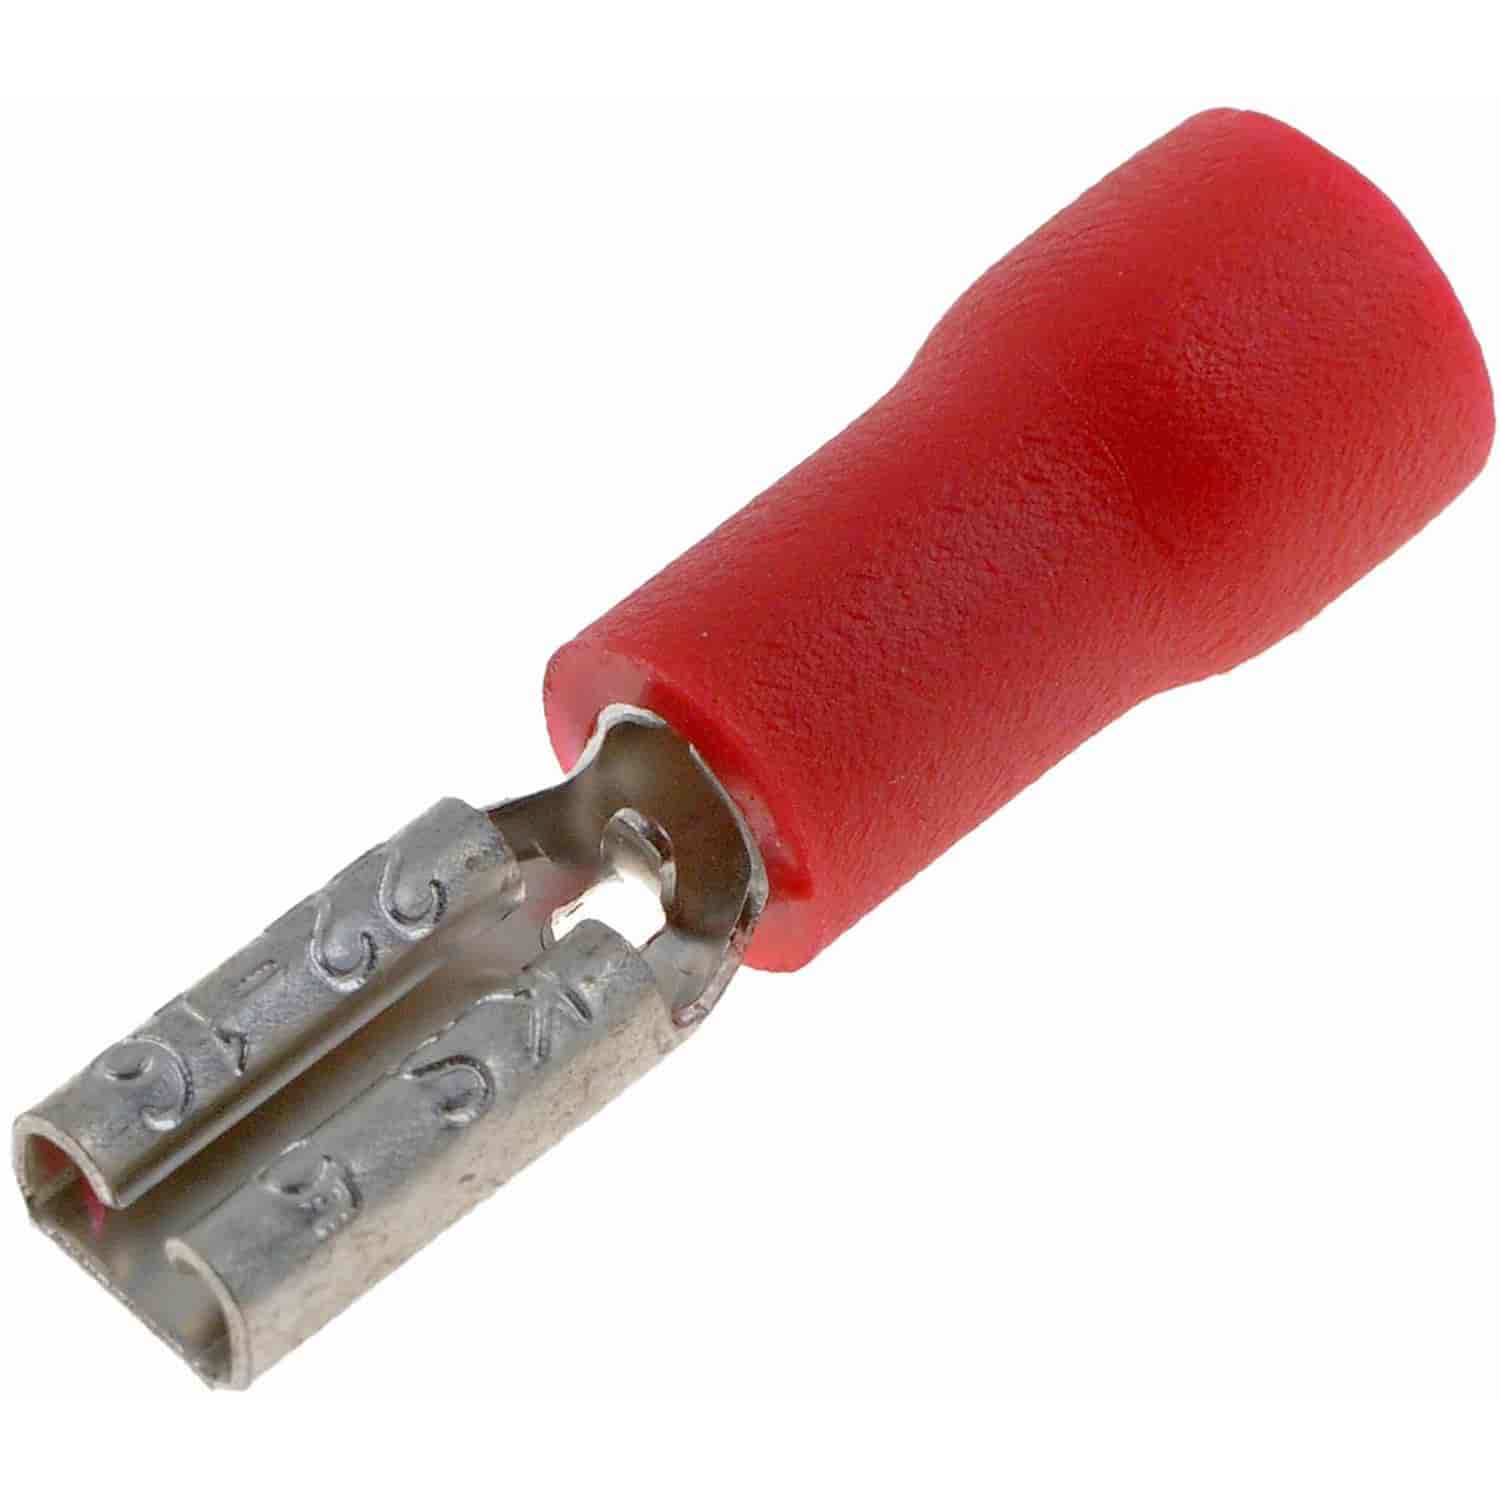 22-18 Gauge Female Disconnect .110 In. Red